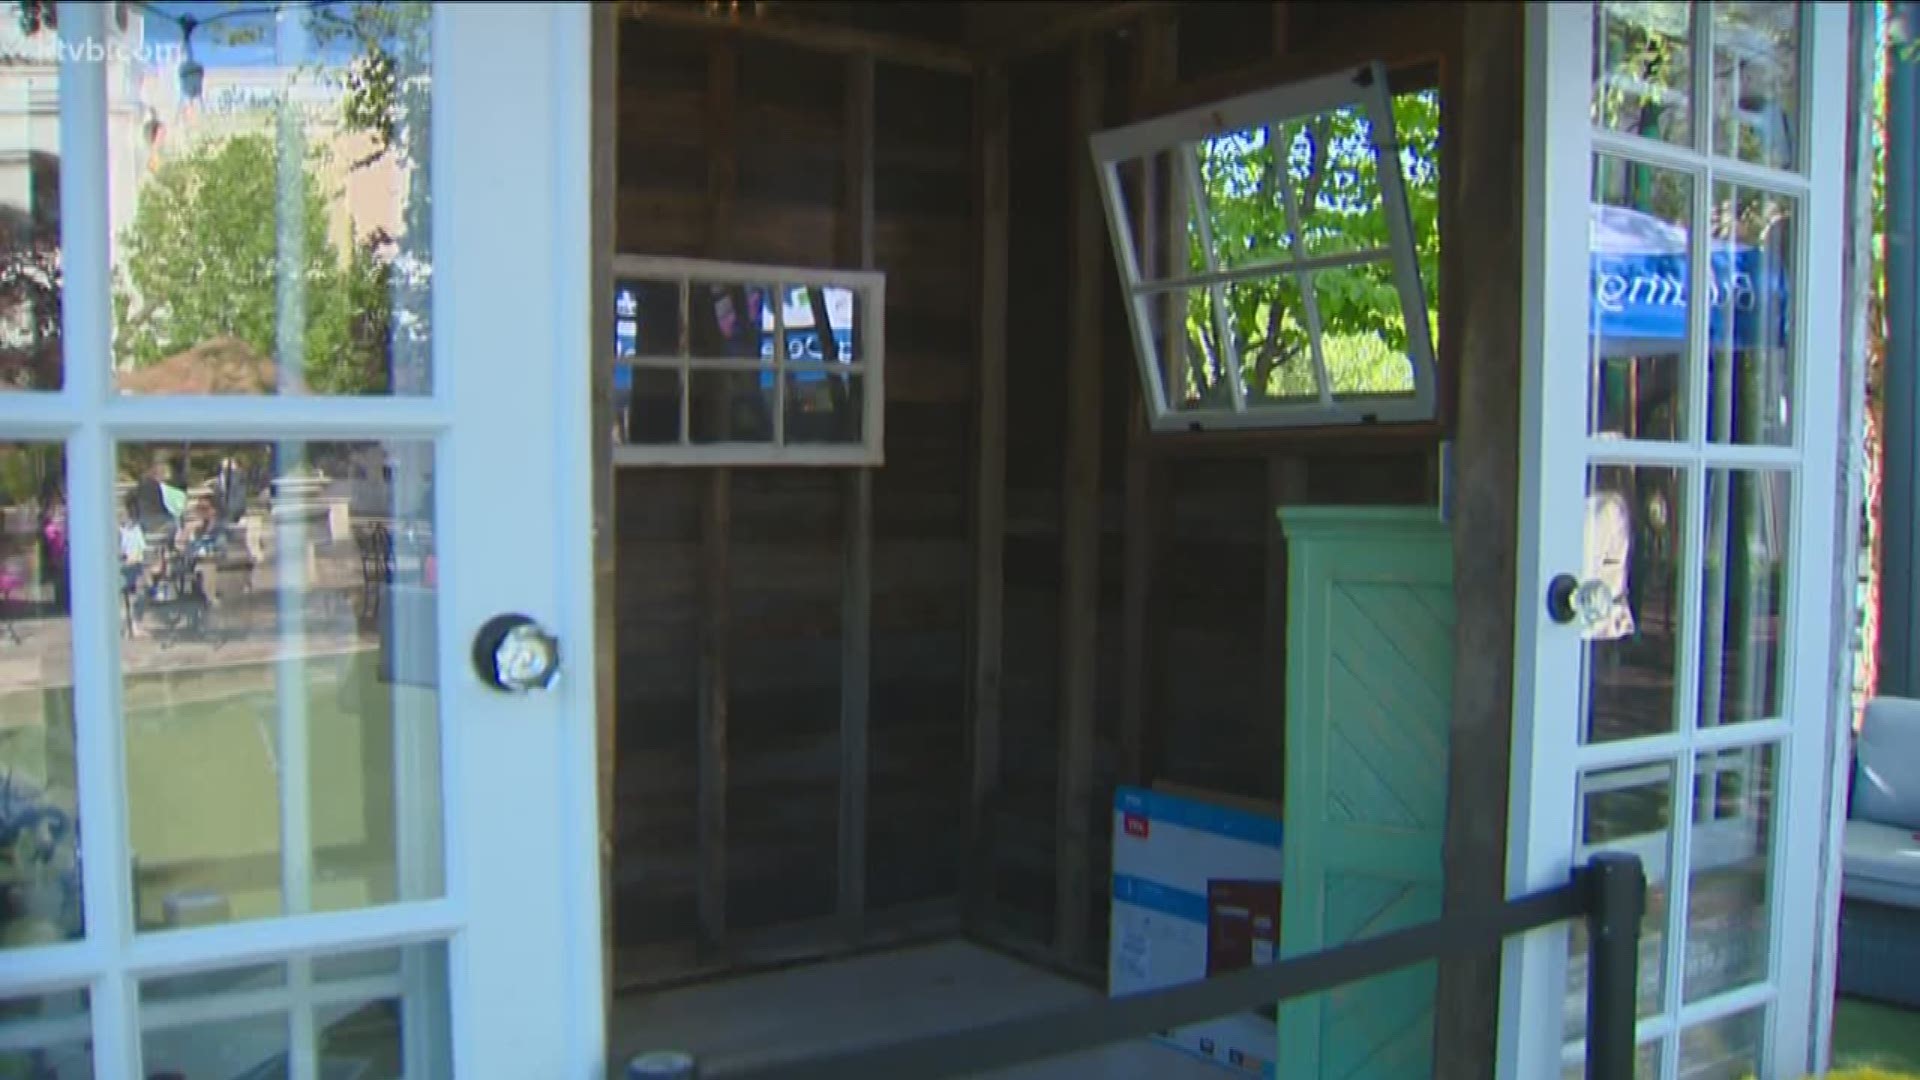 Playhouses will be raffled off to help Habitat for Humanity